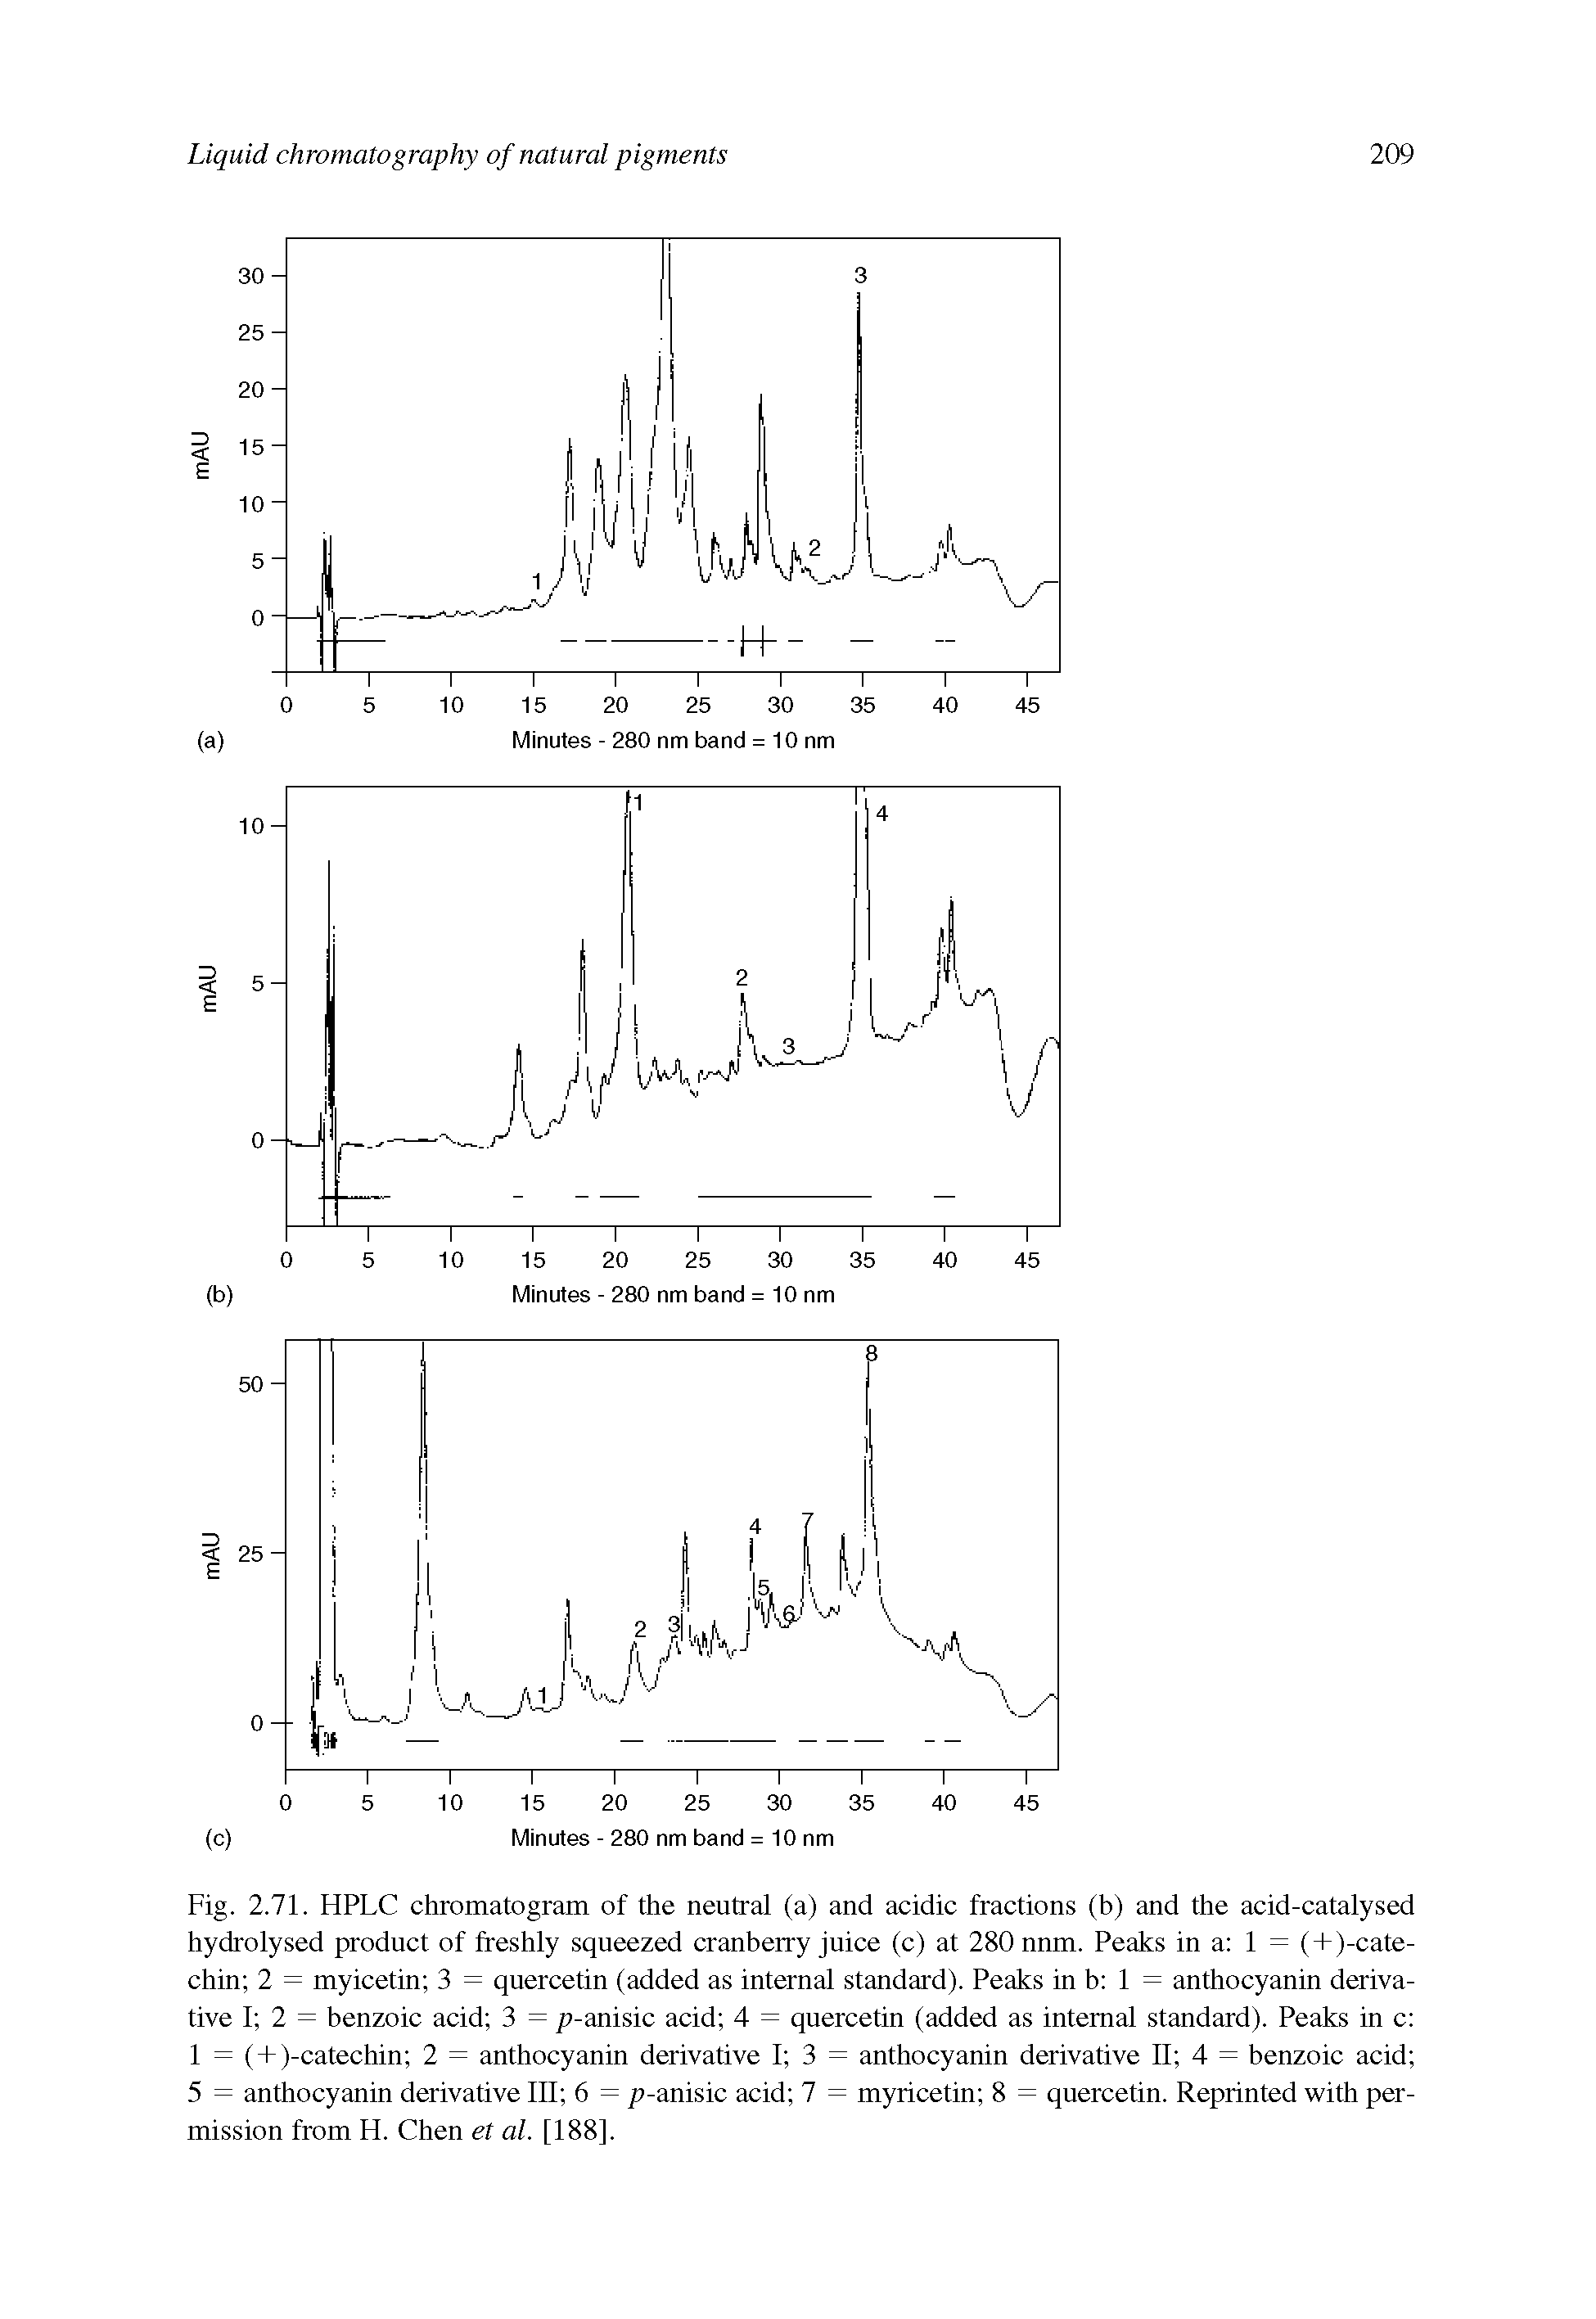 Fig. 2.71. HPLC chromatogram of the neutral (a) and acidic fractions (b) and the acid-catalysed hydrolysed product of freshly squeezed cranberry juice (c) at 280 nnm. Peaks in a 1 = ( + )-cate-chin 2 = myicetin 3 = quercetin (added as internal standard). Peaks in b 1 = anthocyanin derivative I 2 = benzoic acid 3 = p-anisic acid 4 = quercetin (added as internal standard). Peaks in c 1 = ( + )-catechin 2 = anthocyanin derivative I 3 = anthocyanin derivative II 4 = benzoic acid 5 = anthocyanin derivative III 6 = p-anisic acid 7 = myricetin 8 = quercetin. Reprinted with permission from H. Chen et al. [188].